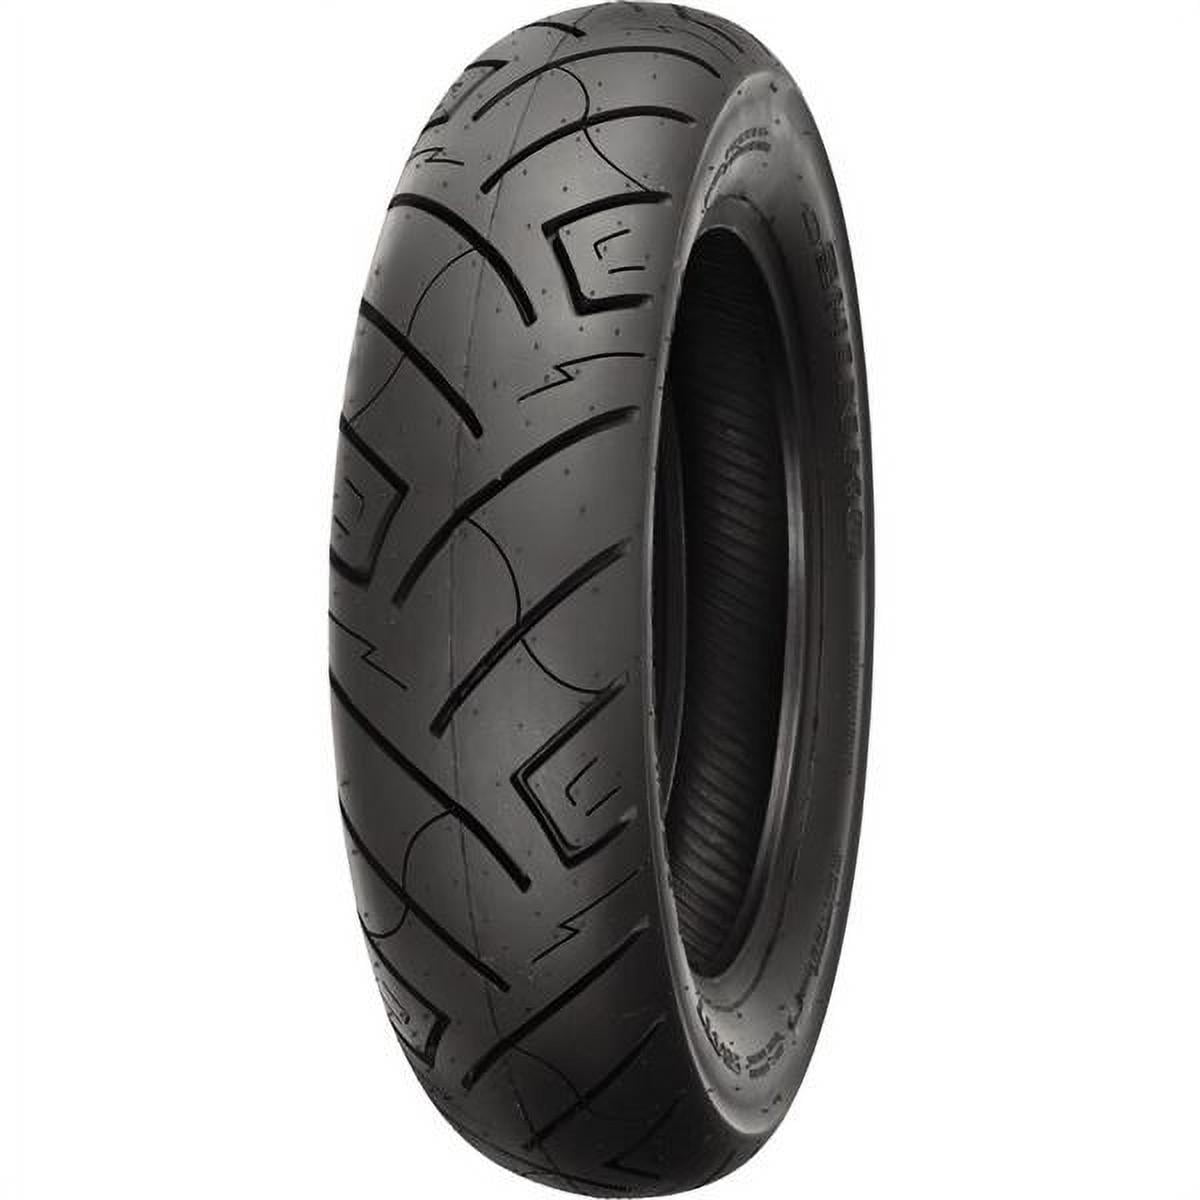 Shinko 777 H.D 130/90B-16 Front Motorcycle Tire Black Wall for Harley-Davidson Softail Deluxe FLSTN 1992-1993 73H 